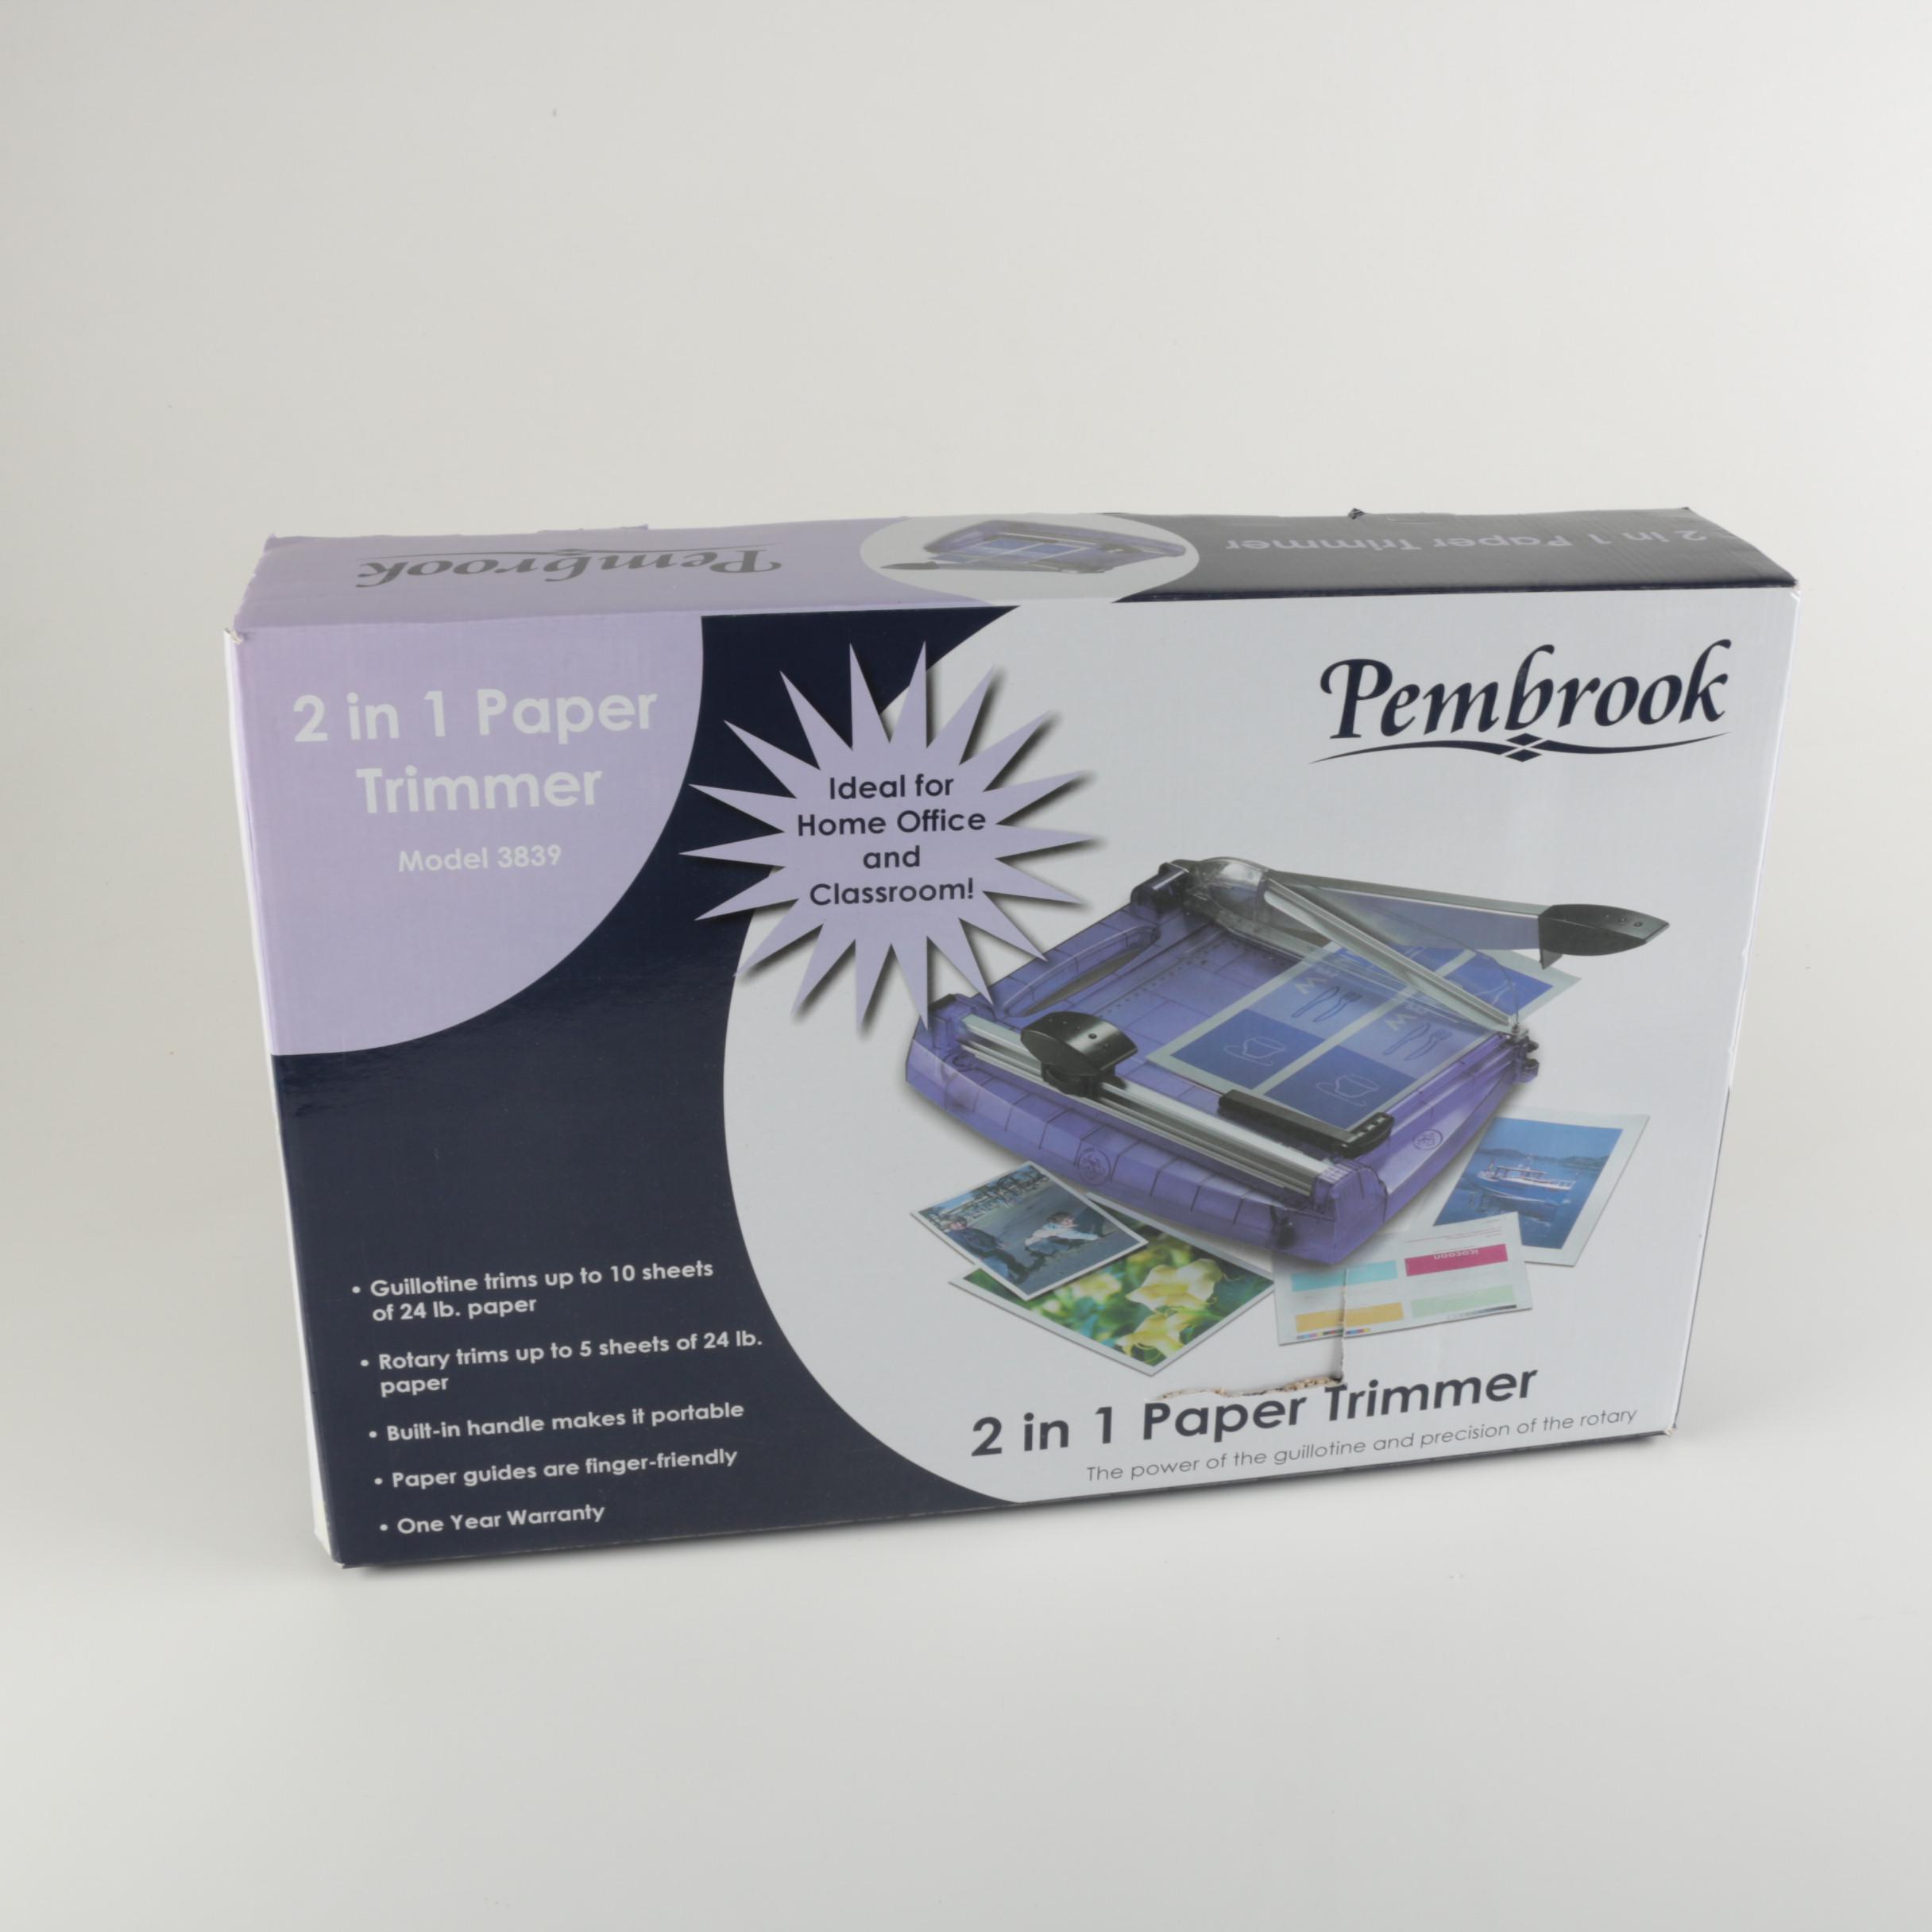 Pembrook 2 In 1 Paper Trimmer BRAND NEW.